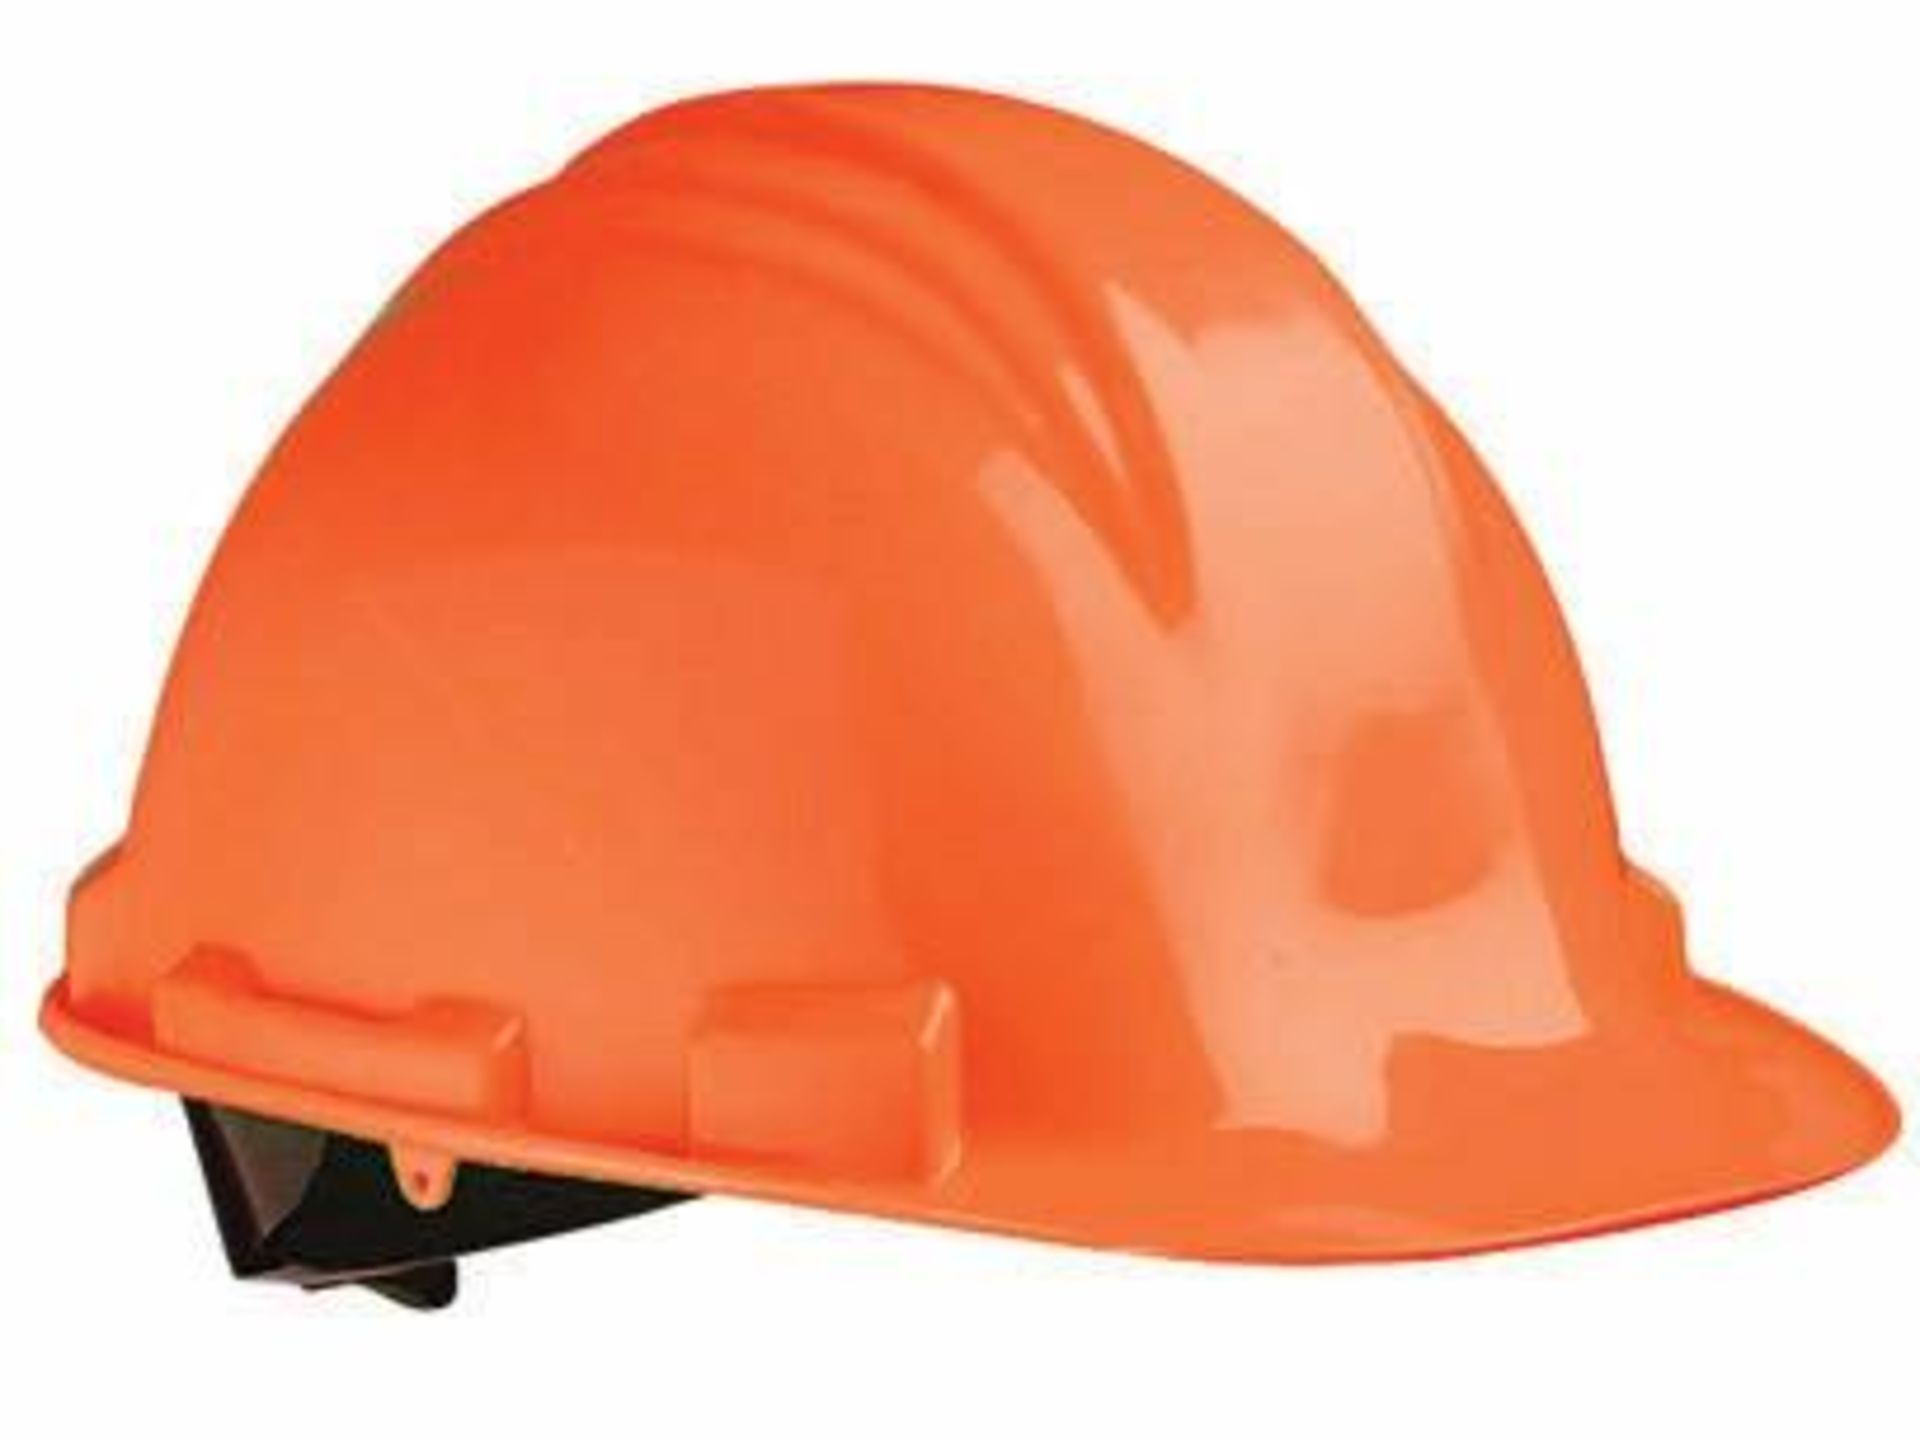 39 x North A59 Safety Helmet Orange - CL185 - Ref: NO/A59/ORANG/P22 - New Stock - Location: Stoke-on